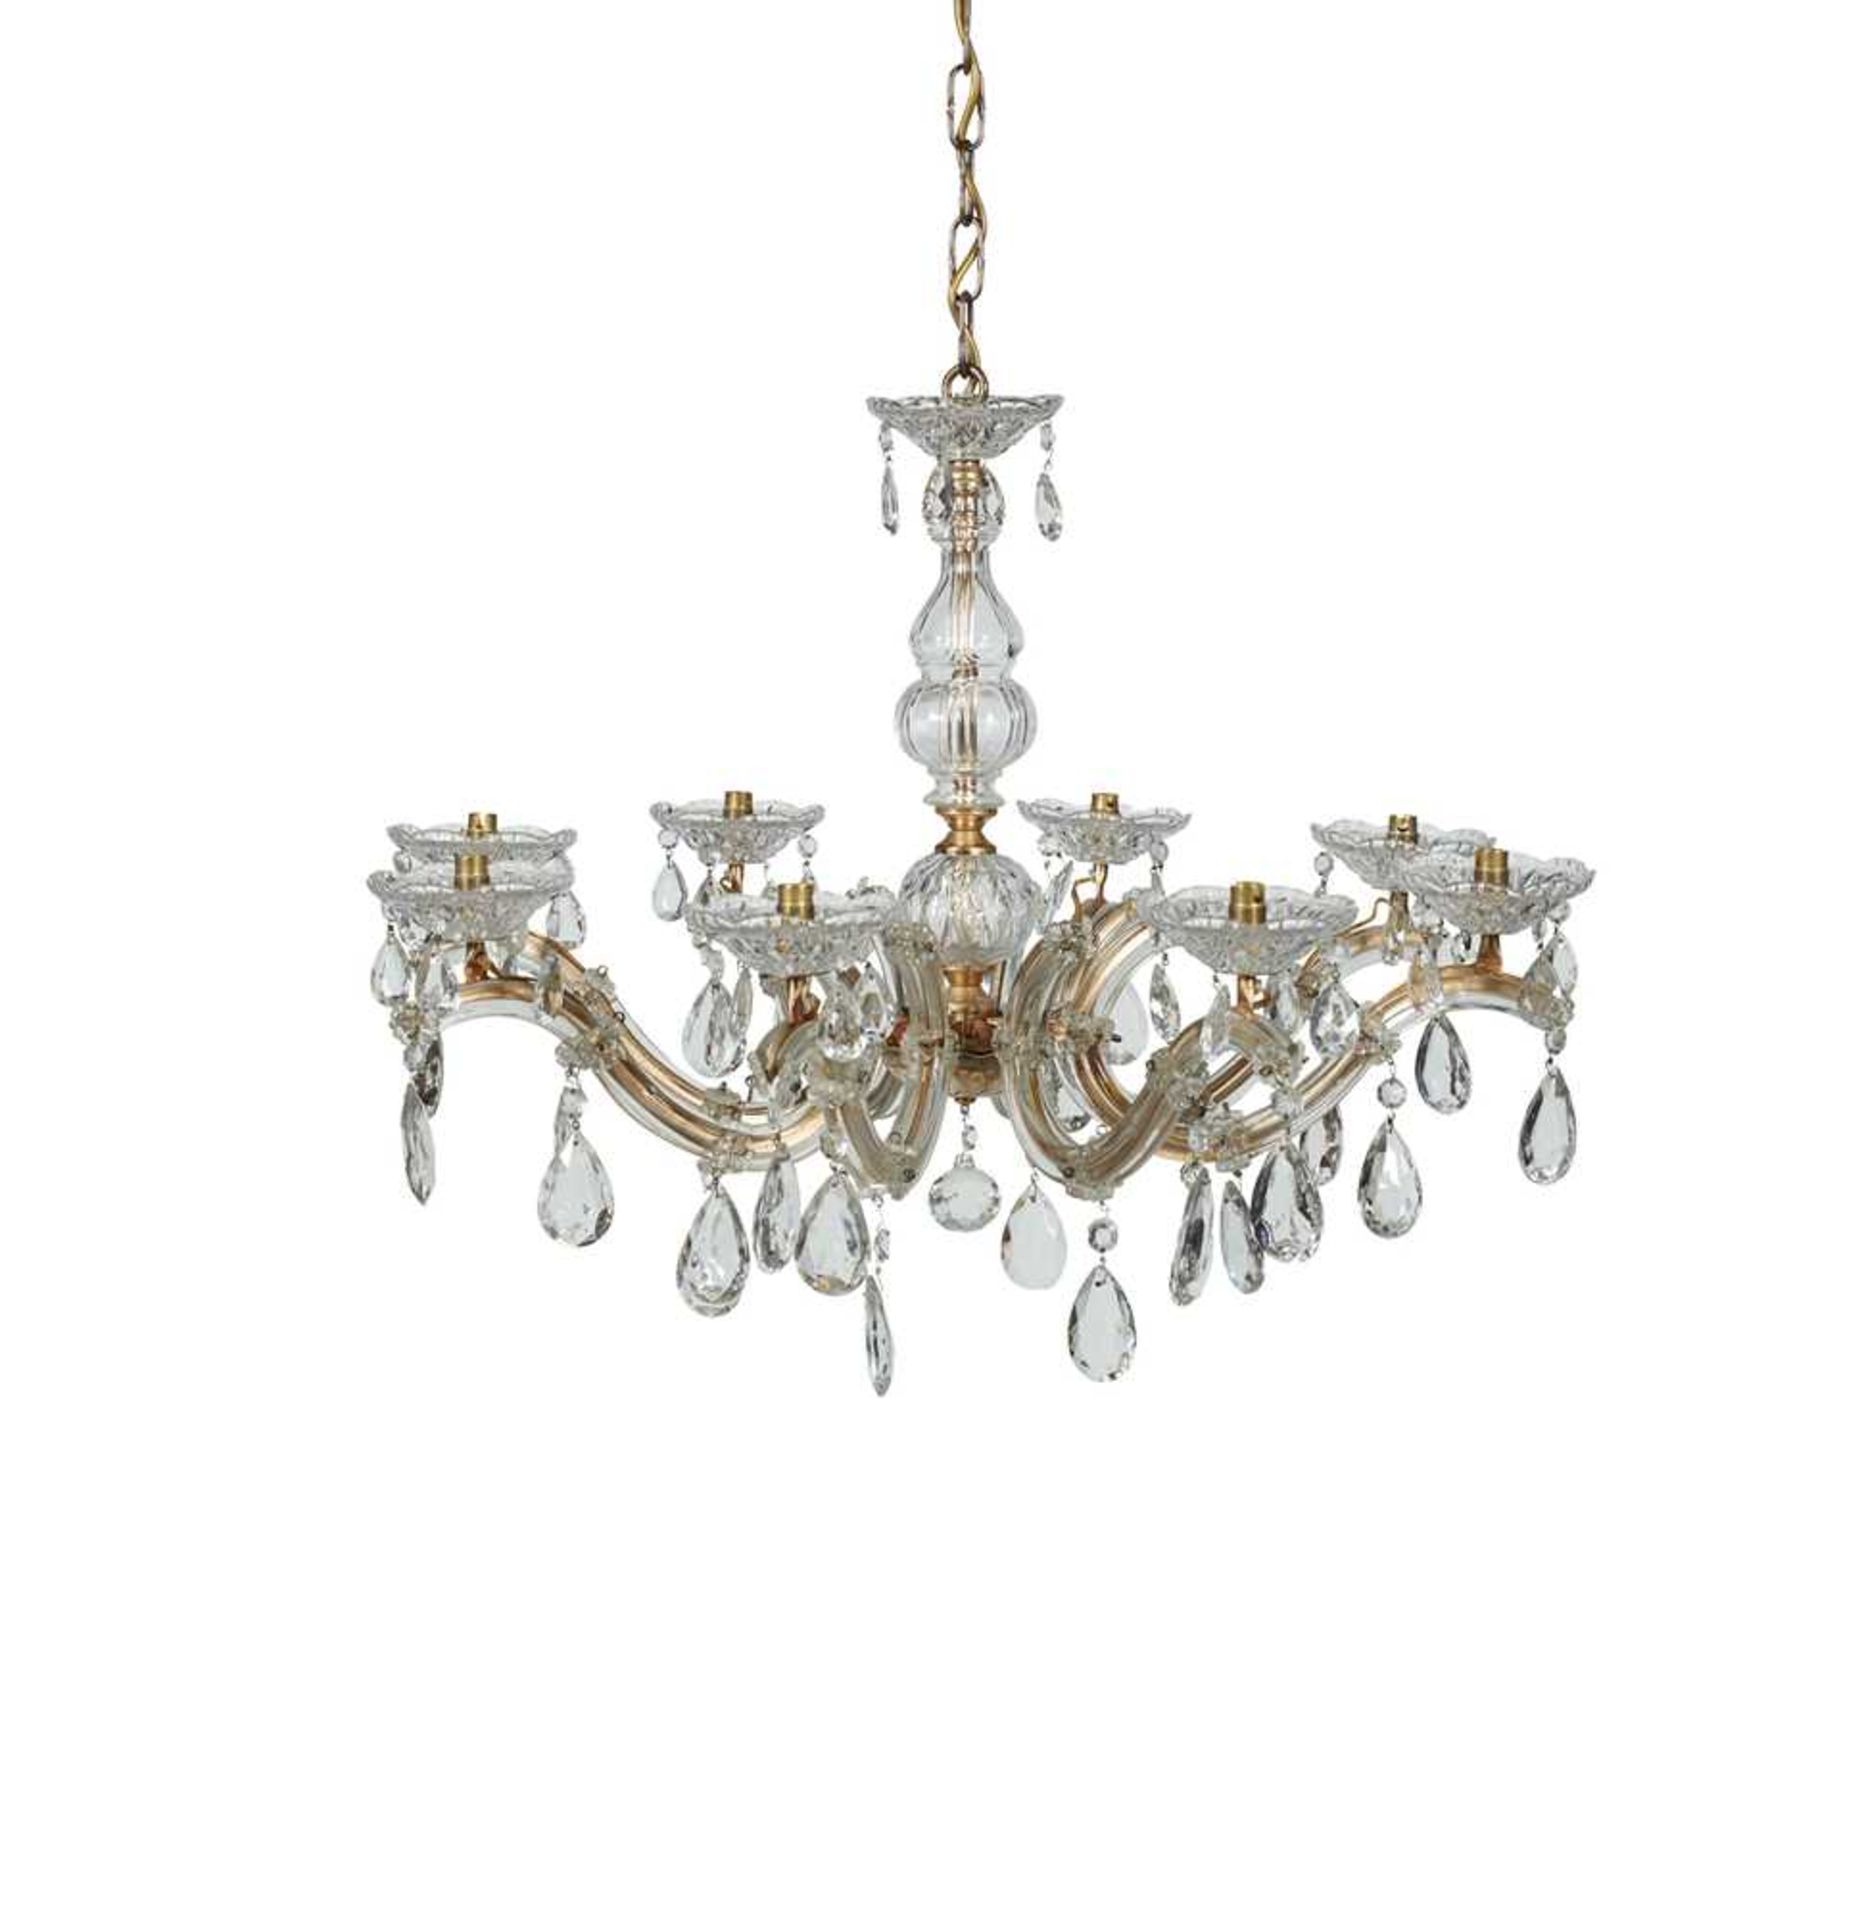 PAIR OF EIGHT BRANCH CUT GLASS CHANDELIERS 20TH CENTURY - Image 2 of 2